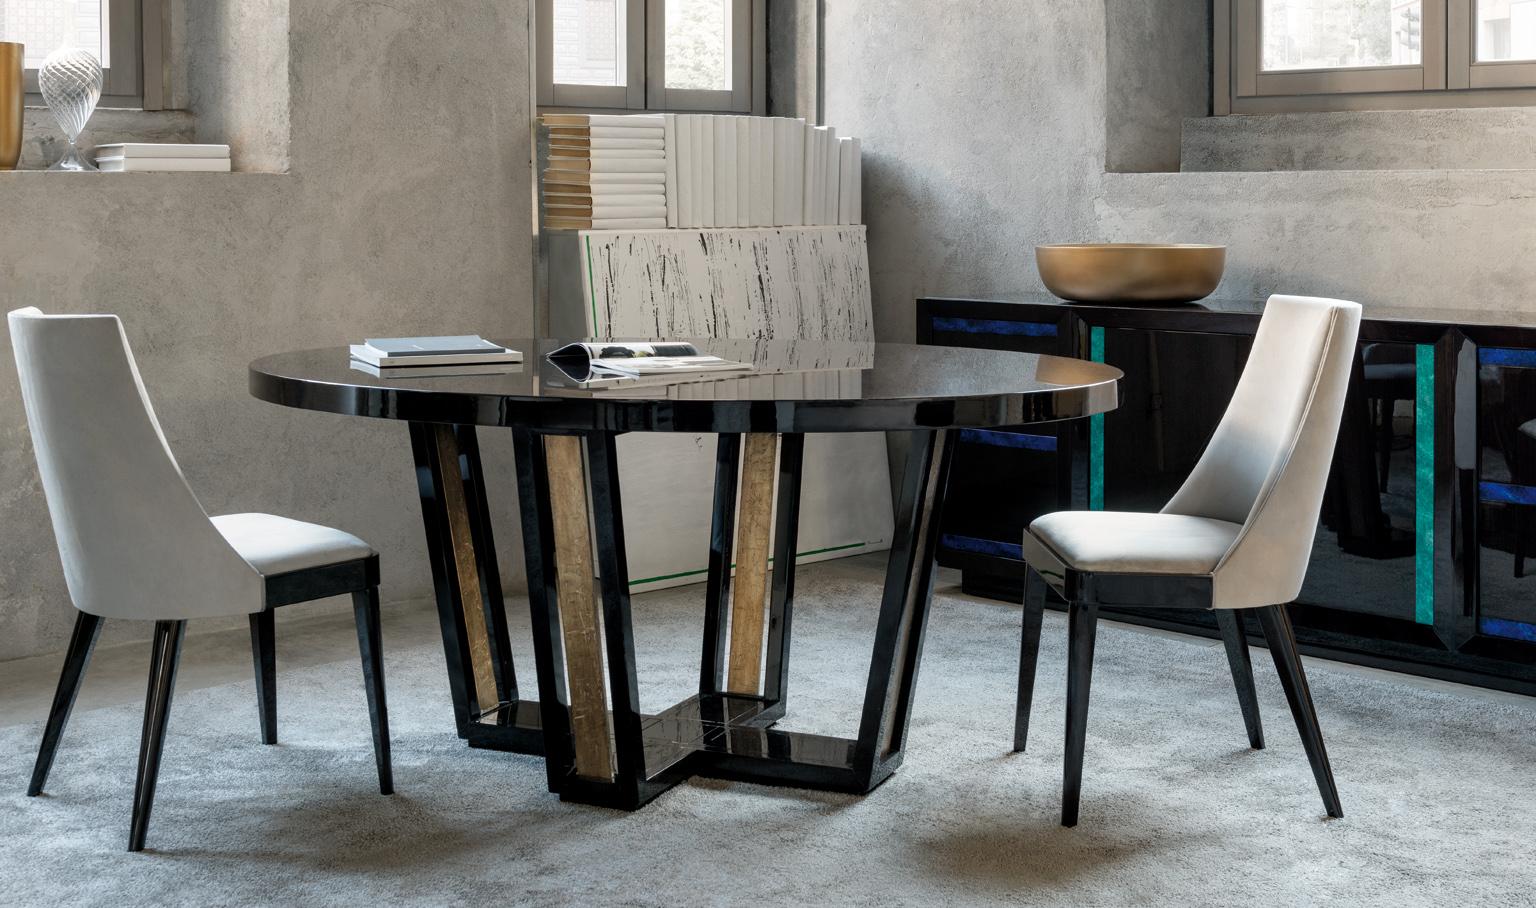 Designed by IC, the dining table is symbol of modern design and expert Italian craftsmanship. The luxurious oval dining table with fixed tabletop and base enriched with hand-applied crinkled leaf, offers a glamorous appeal.
Finishes: glossy dark oak